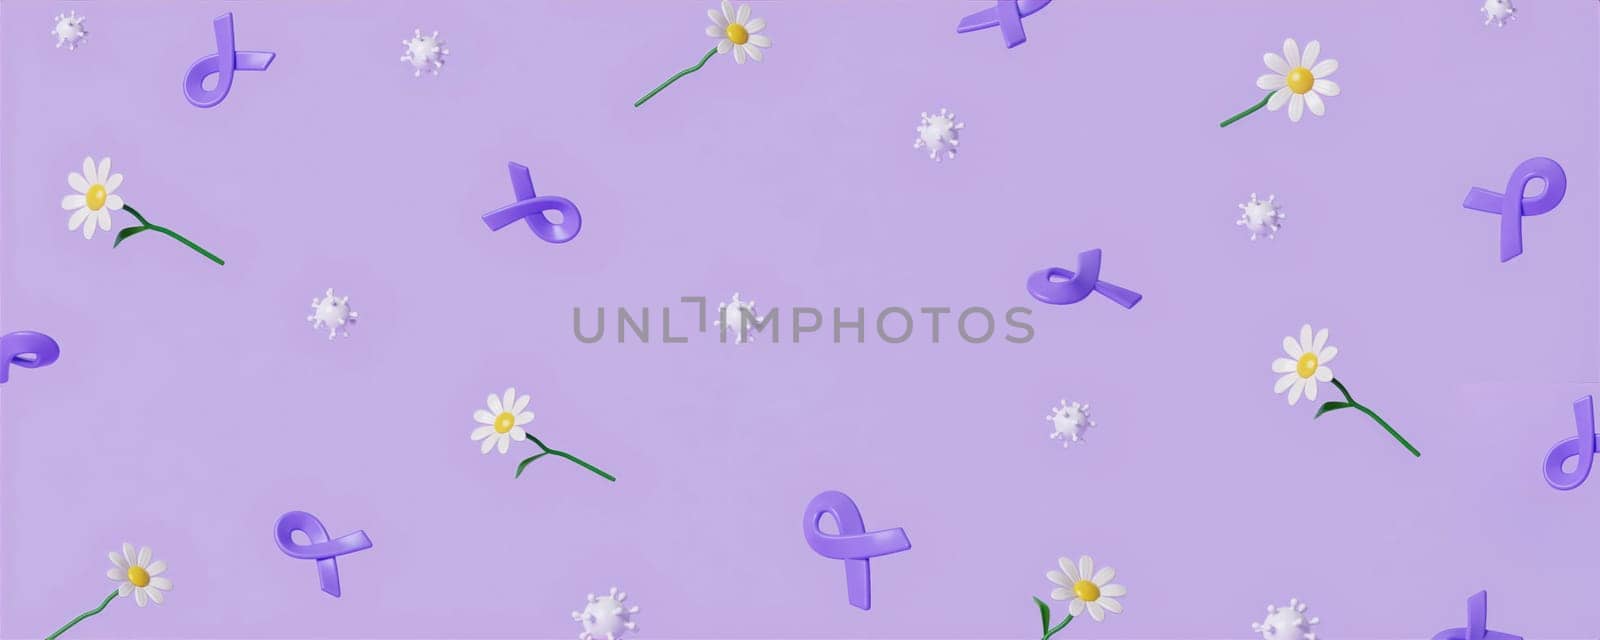 purple ribbon with flowers and space for world Cancer Awareness Month and World Cancer Day banner background design in 3D illustration..